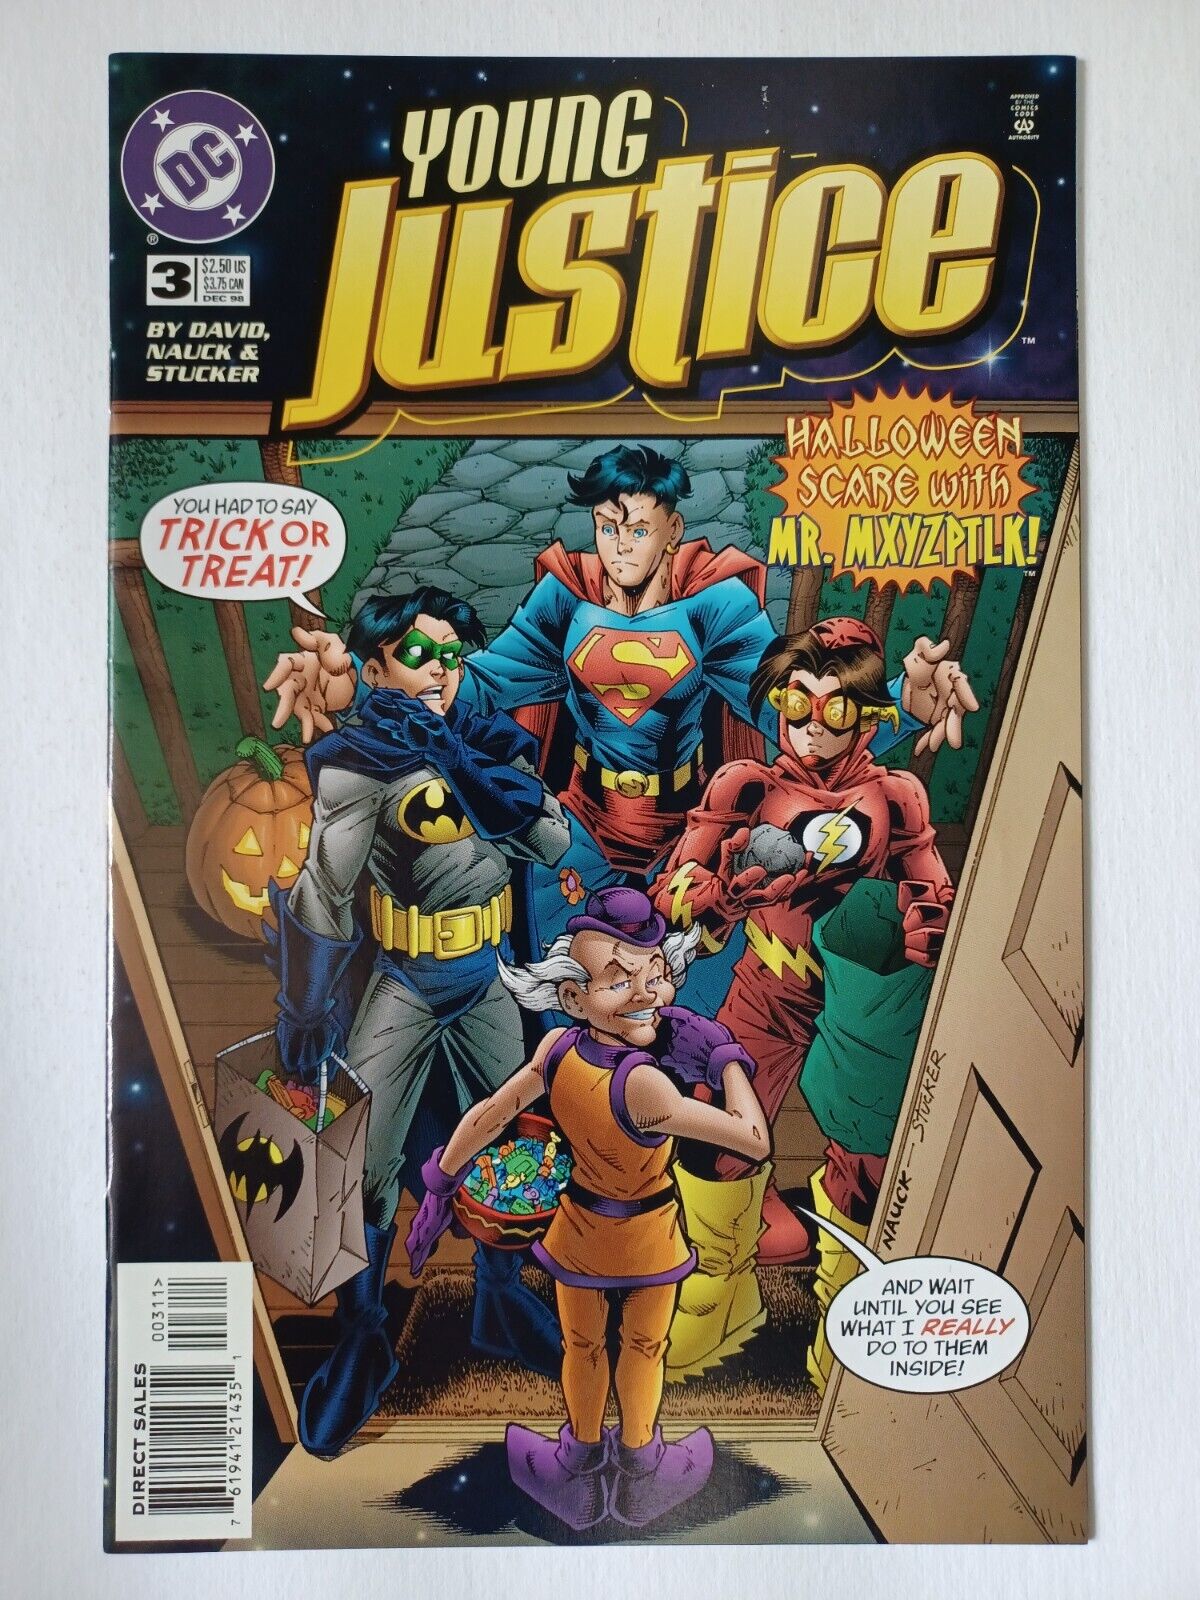 Young Justice #3 - Halloween Cover - Combined Shipping + Great Pics